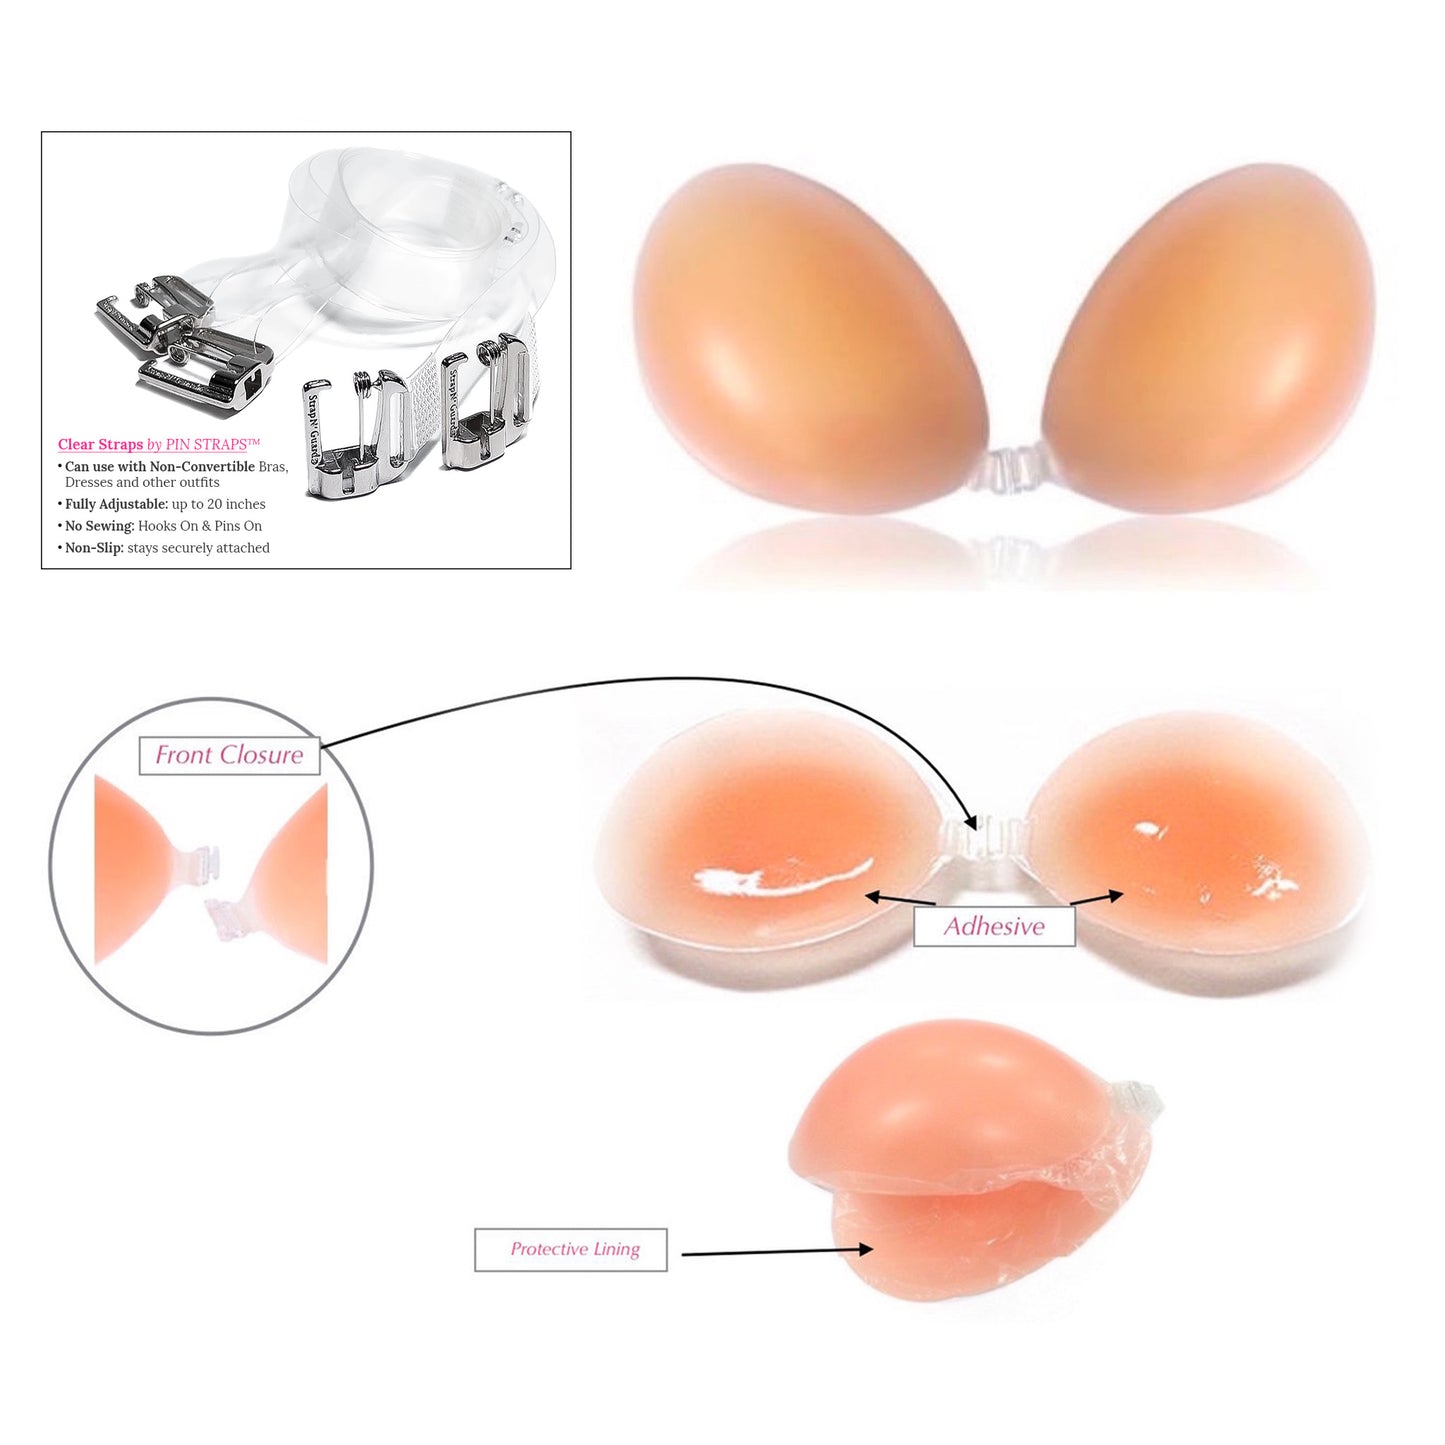 Backless Adhesive Bra (Nude) with Detachable Clear Bra Straps